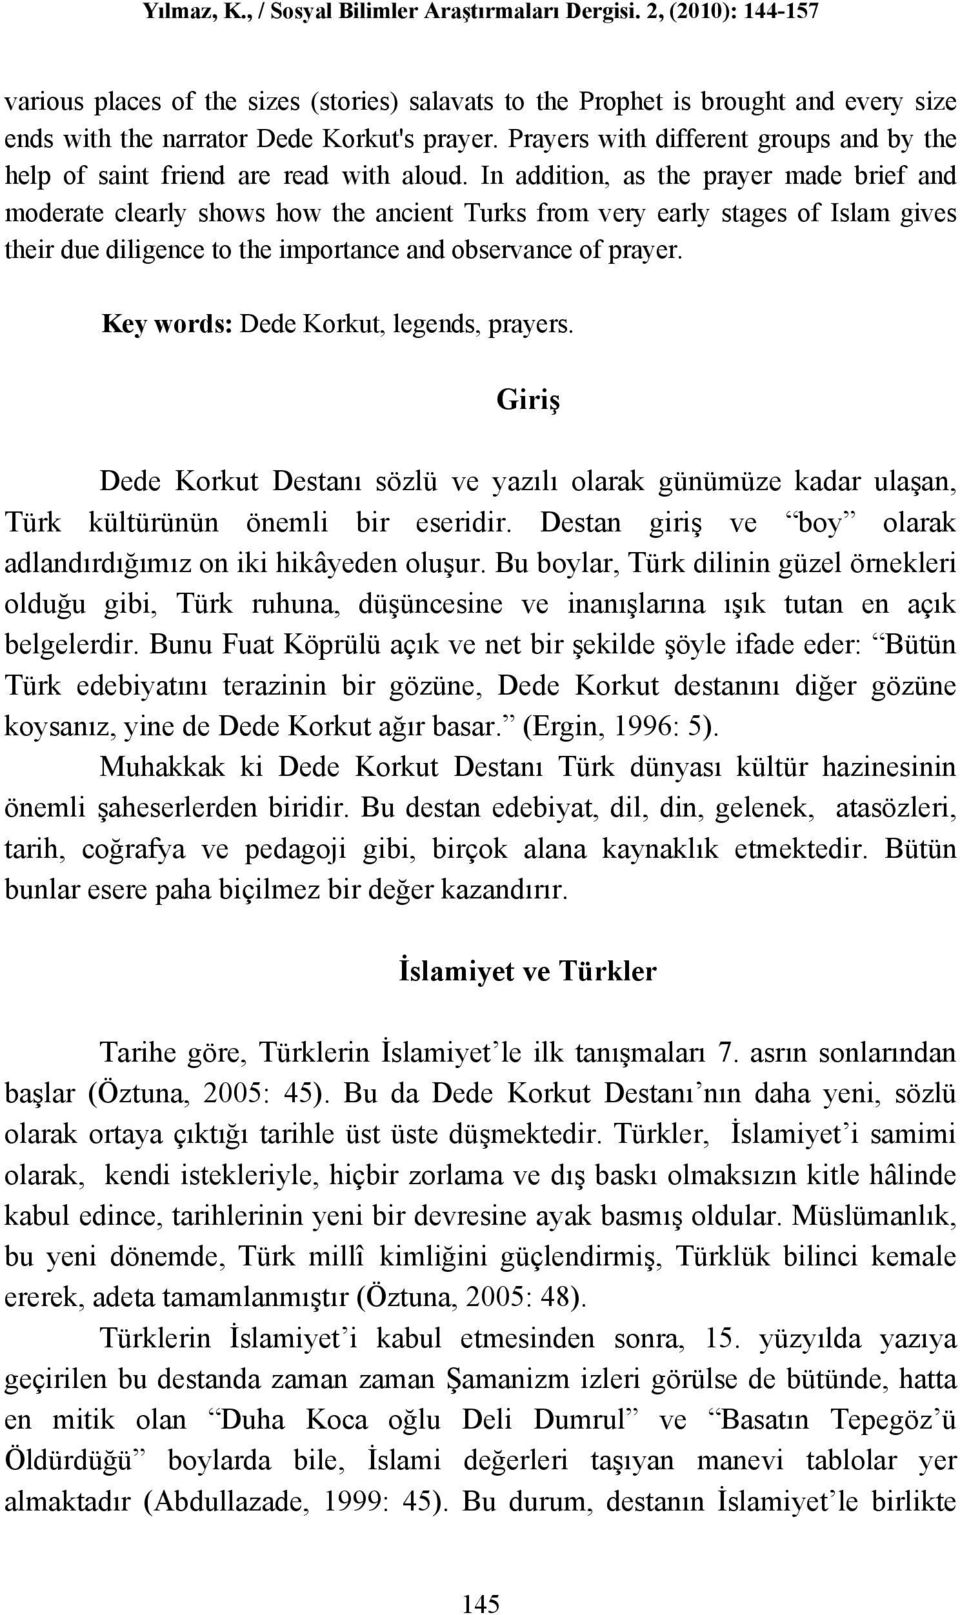 In addition, as the prayer made brief and moderate clearly shows how the ancient Turks from very early stages of Islam gives their due diligence to the importance and observance of prayer.